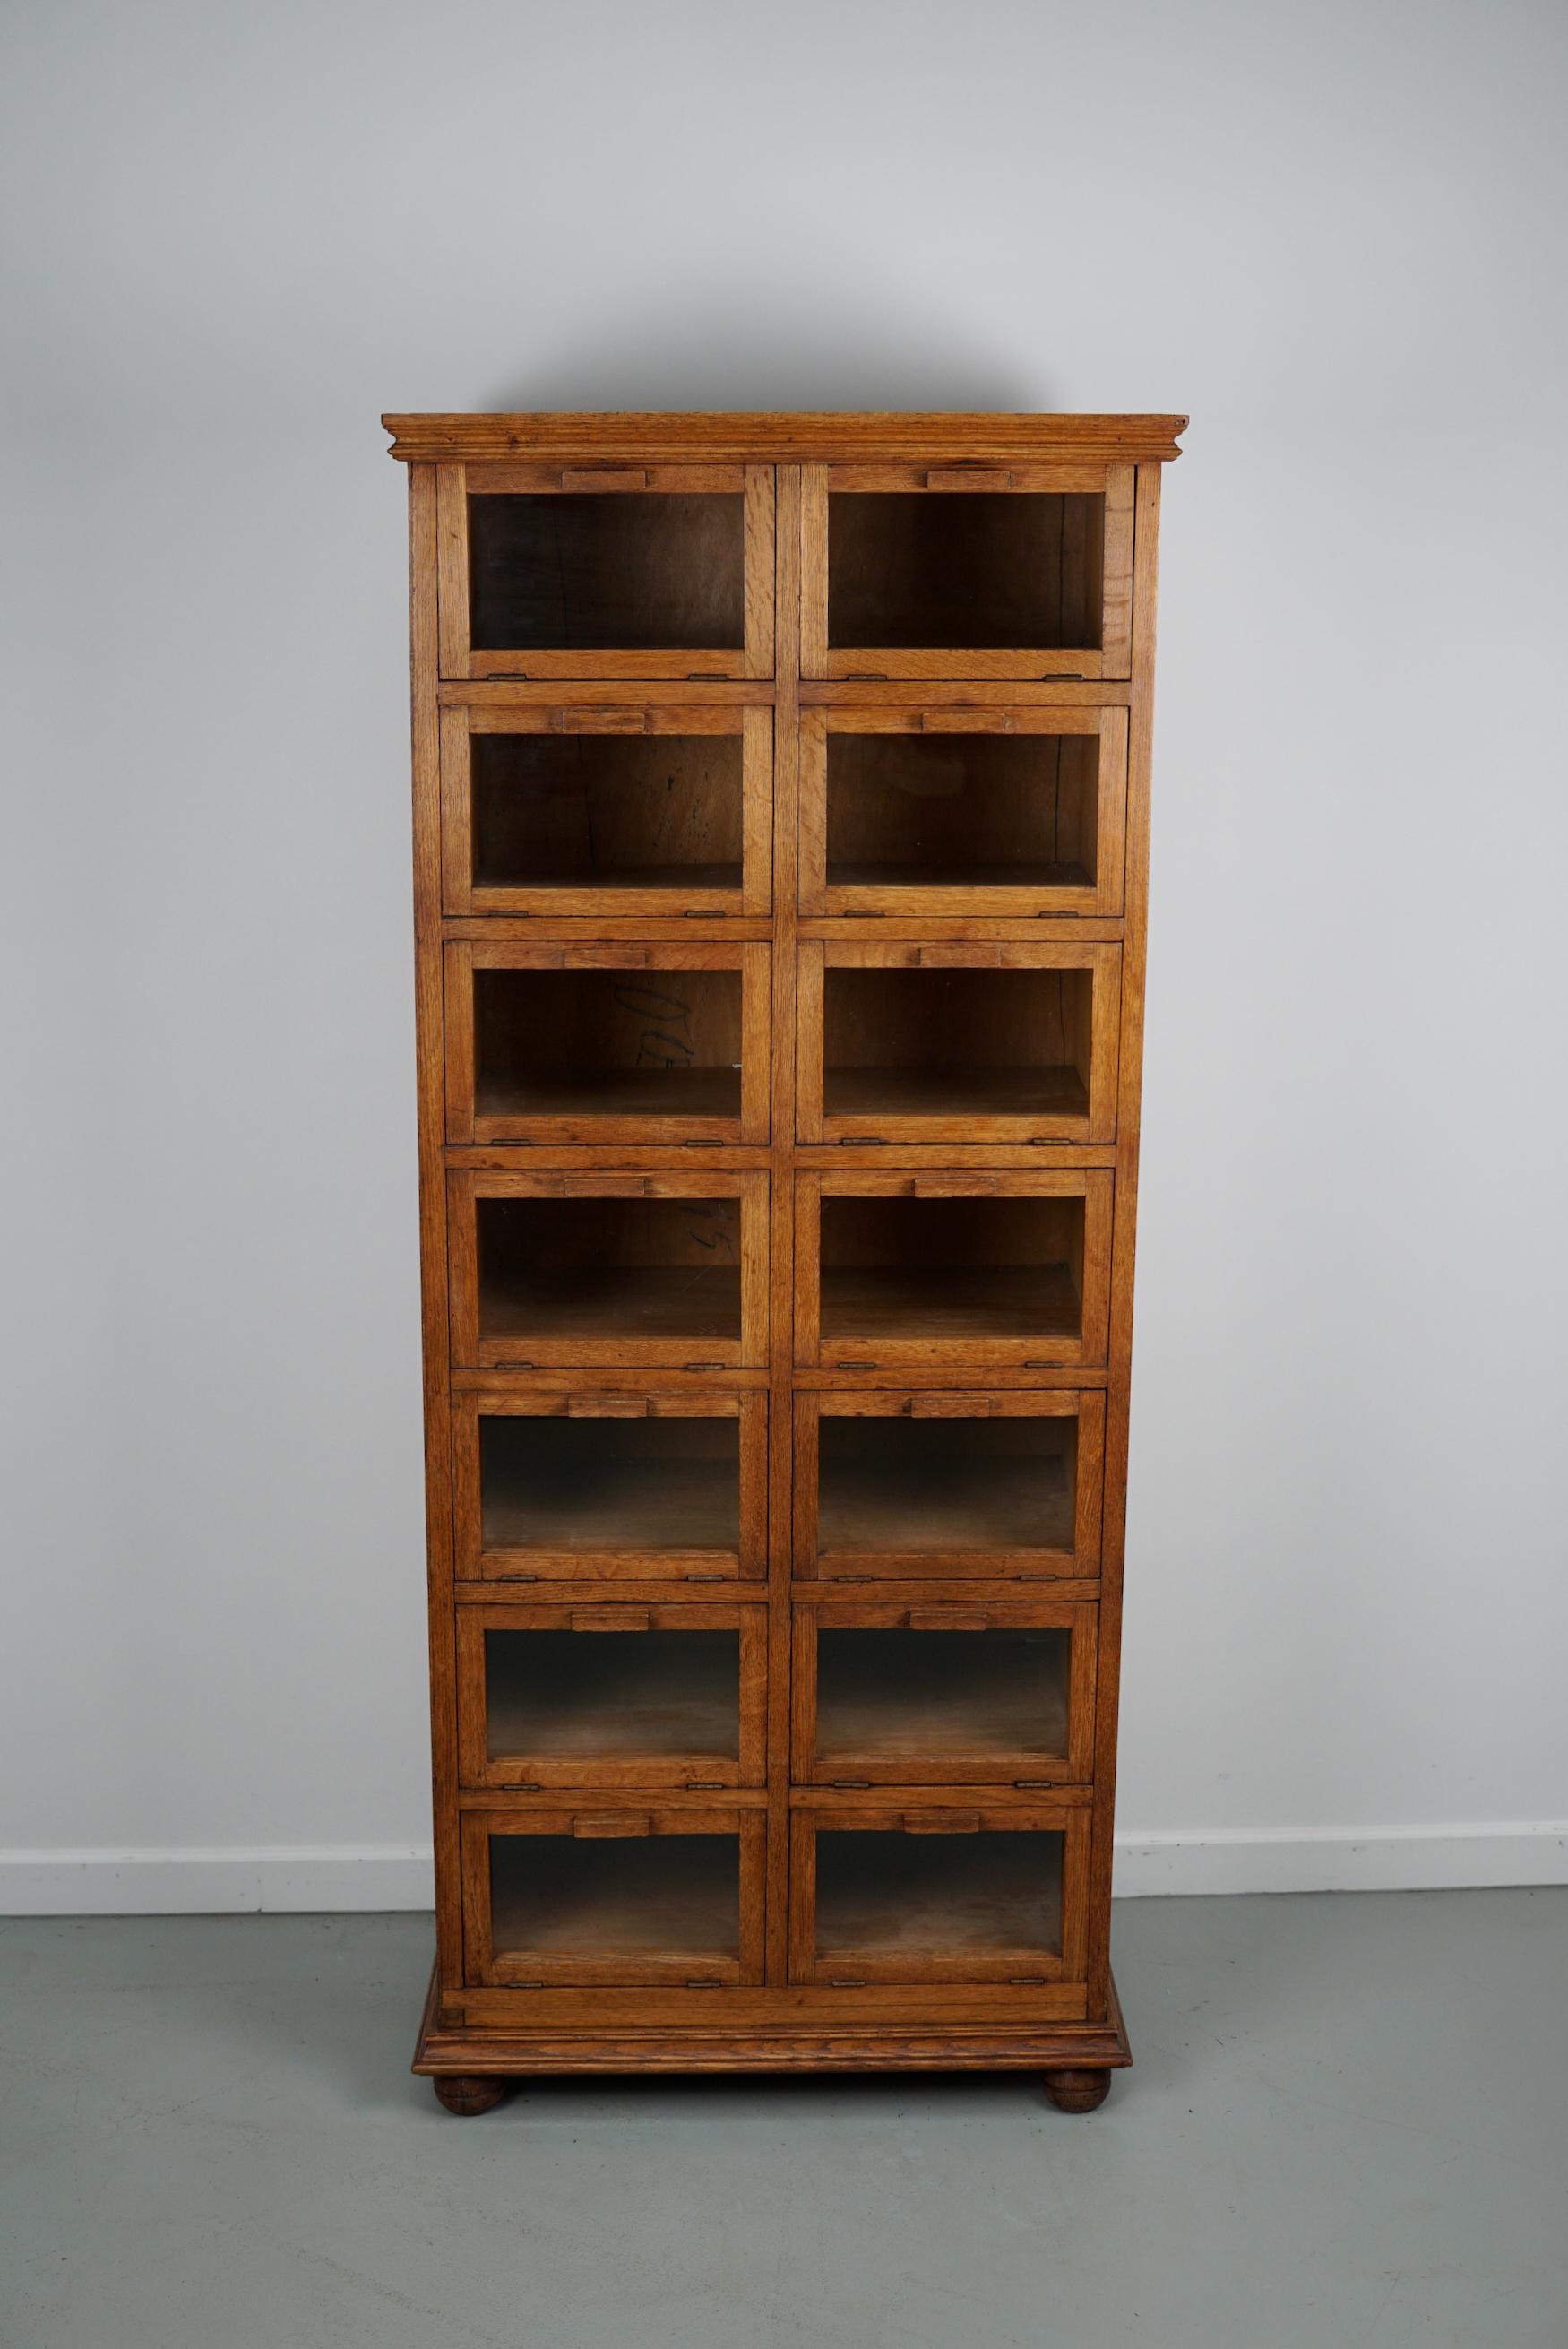 This haberdashery cabinet was produced during the 1930s in the Netherlands. It features 14 drop down doors in oak with glass fronts and oak handles. It was originally used in a warehouse for plant seeds in the city of Delft. The interior dimensions